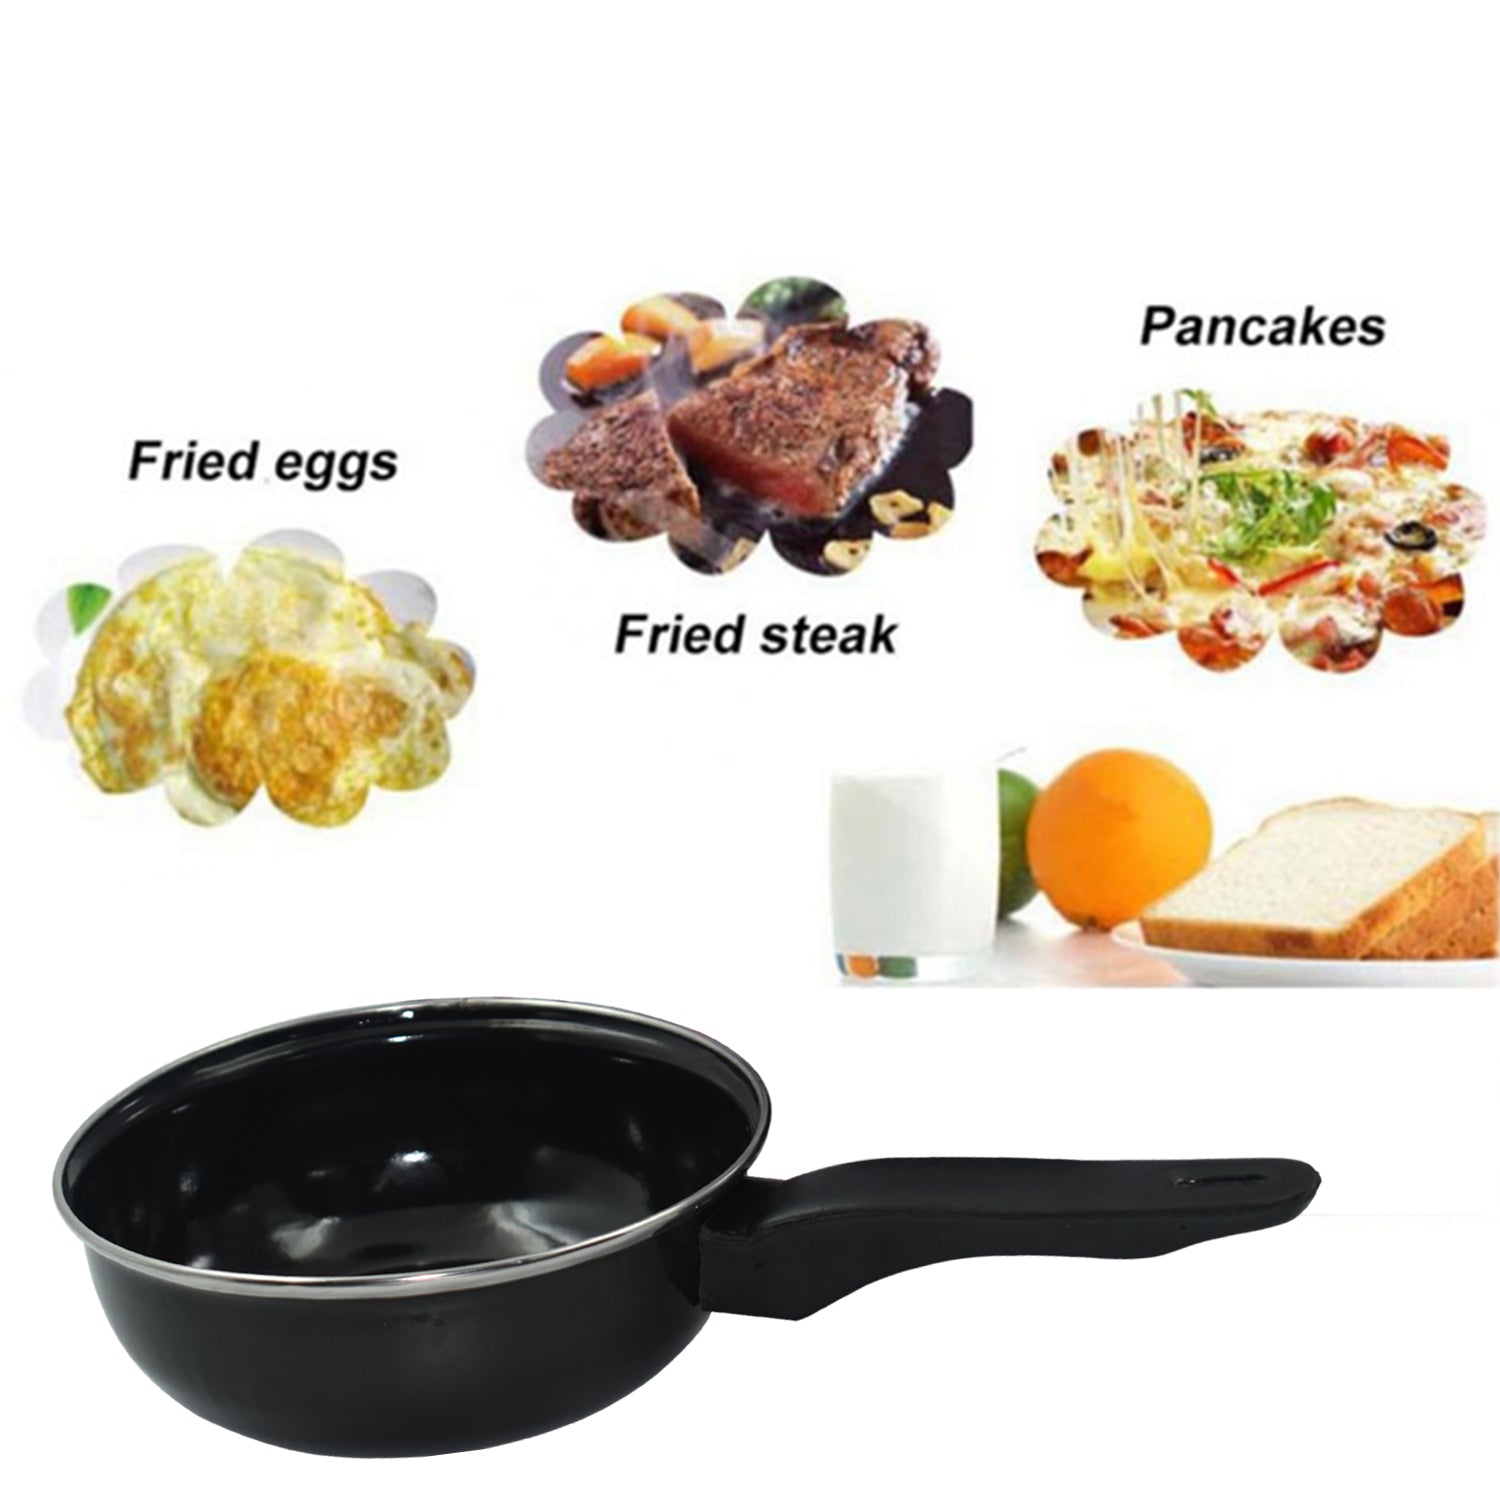 2522 Non-Stick Gas Compatible Fry Pan Without Lid DeoDap